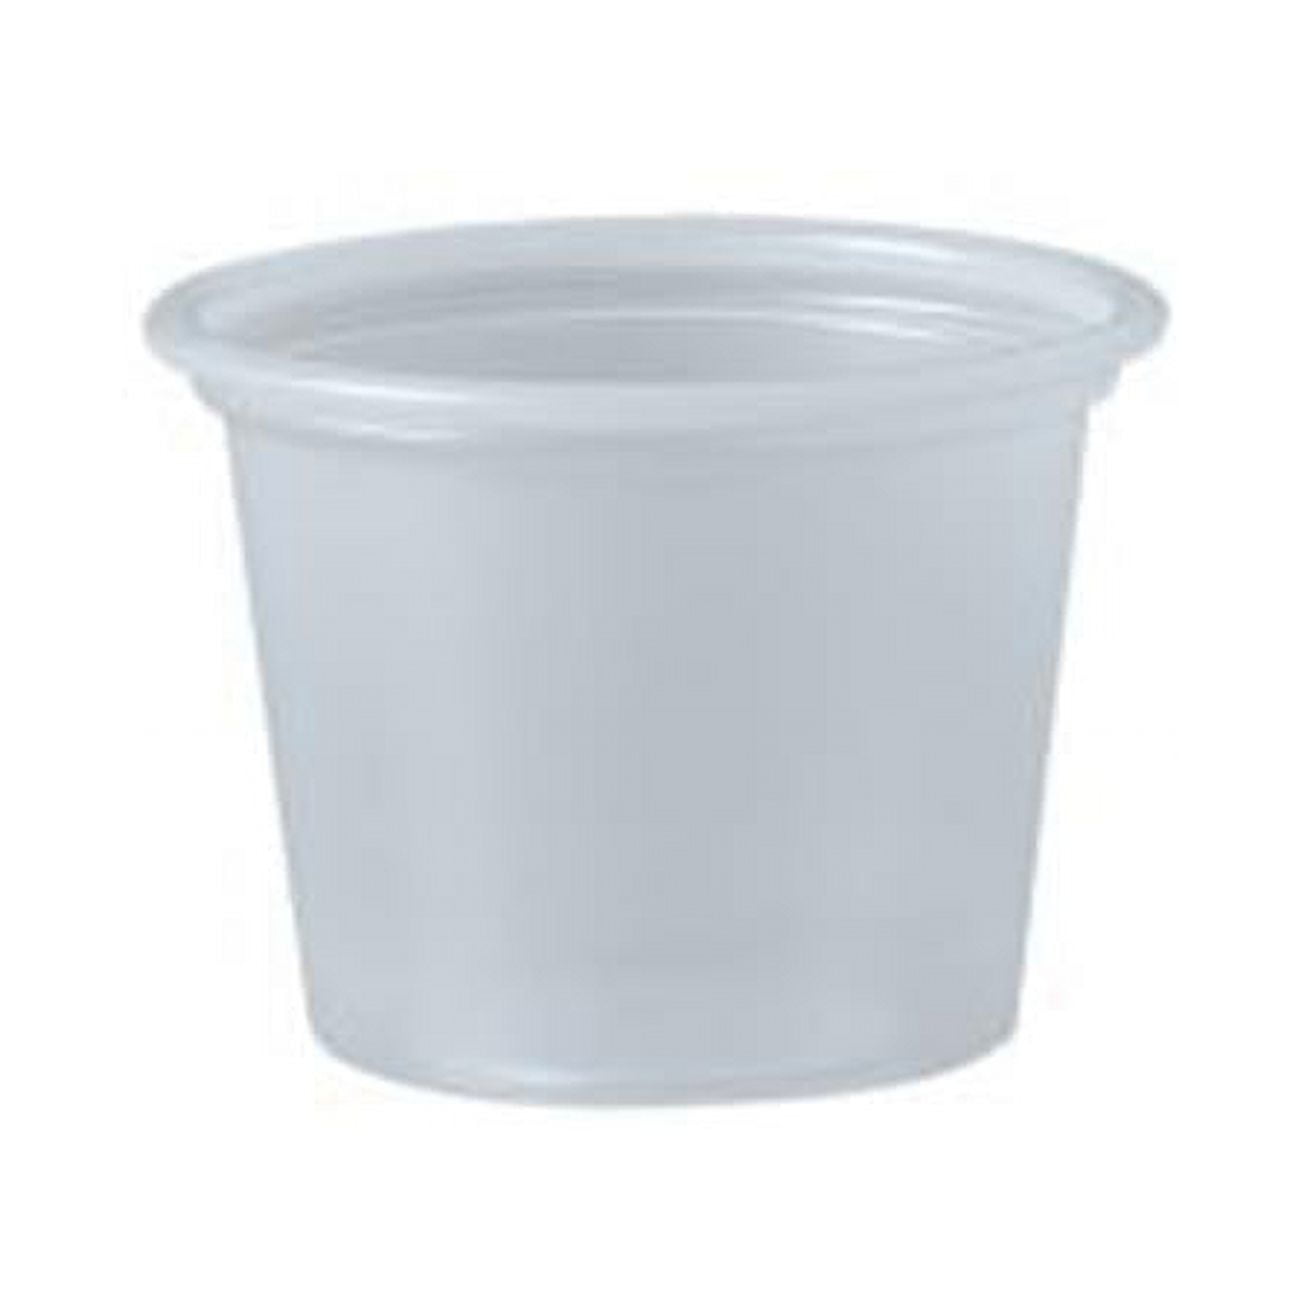 P100n Cpc 1 Oz Plastic Portions Containers Souffle Cup, Translucent - Case Of 2500